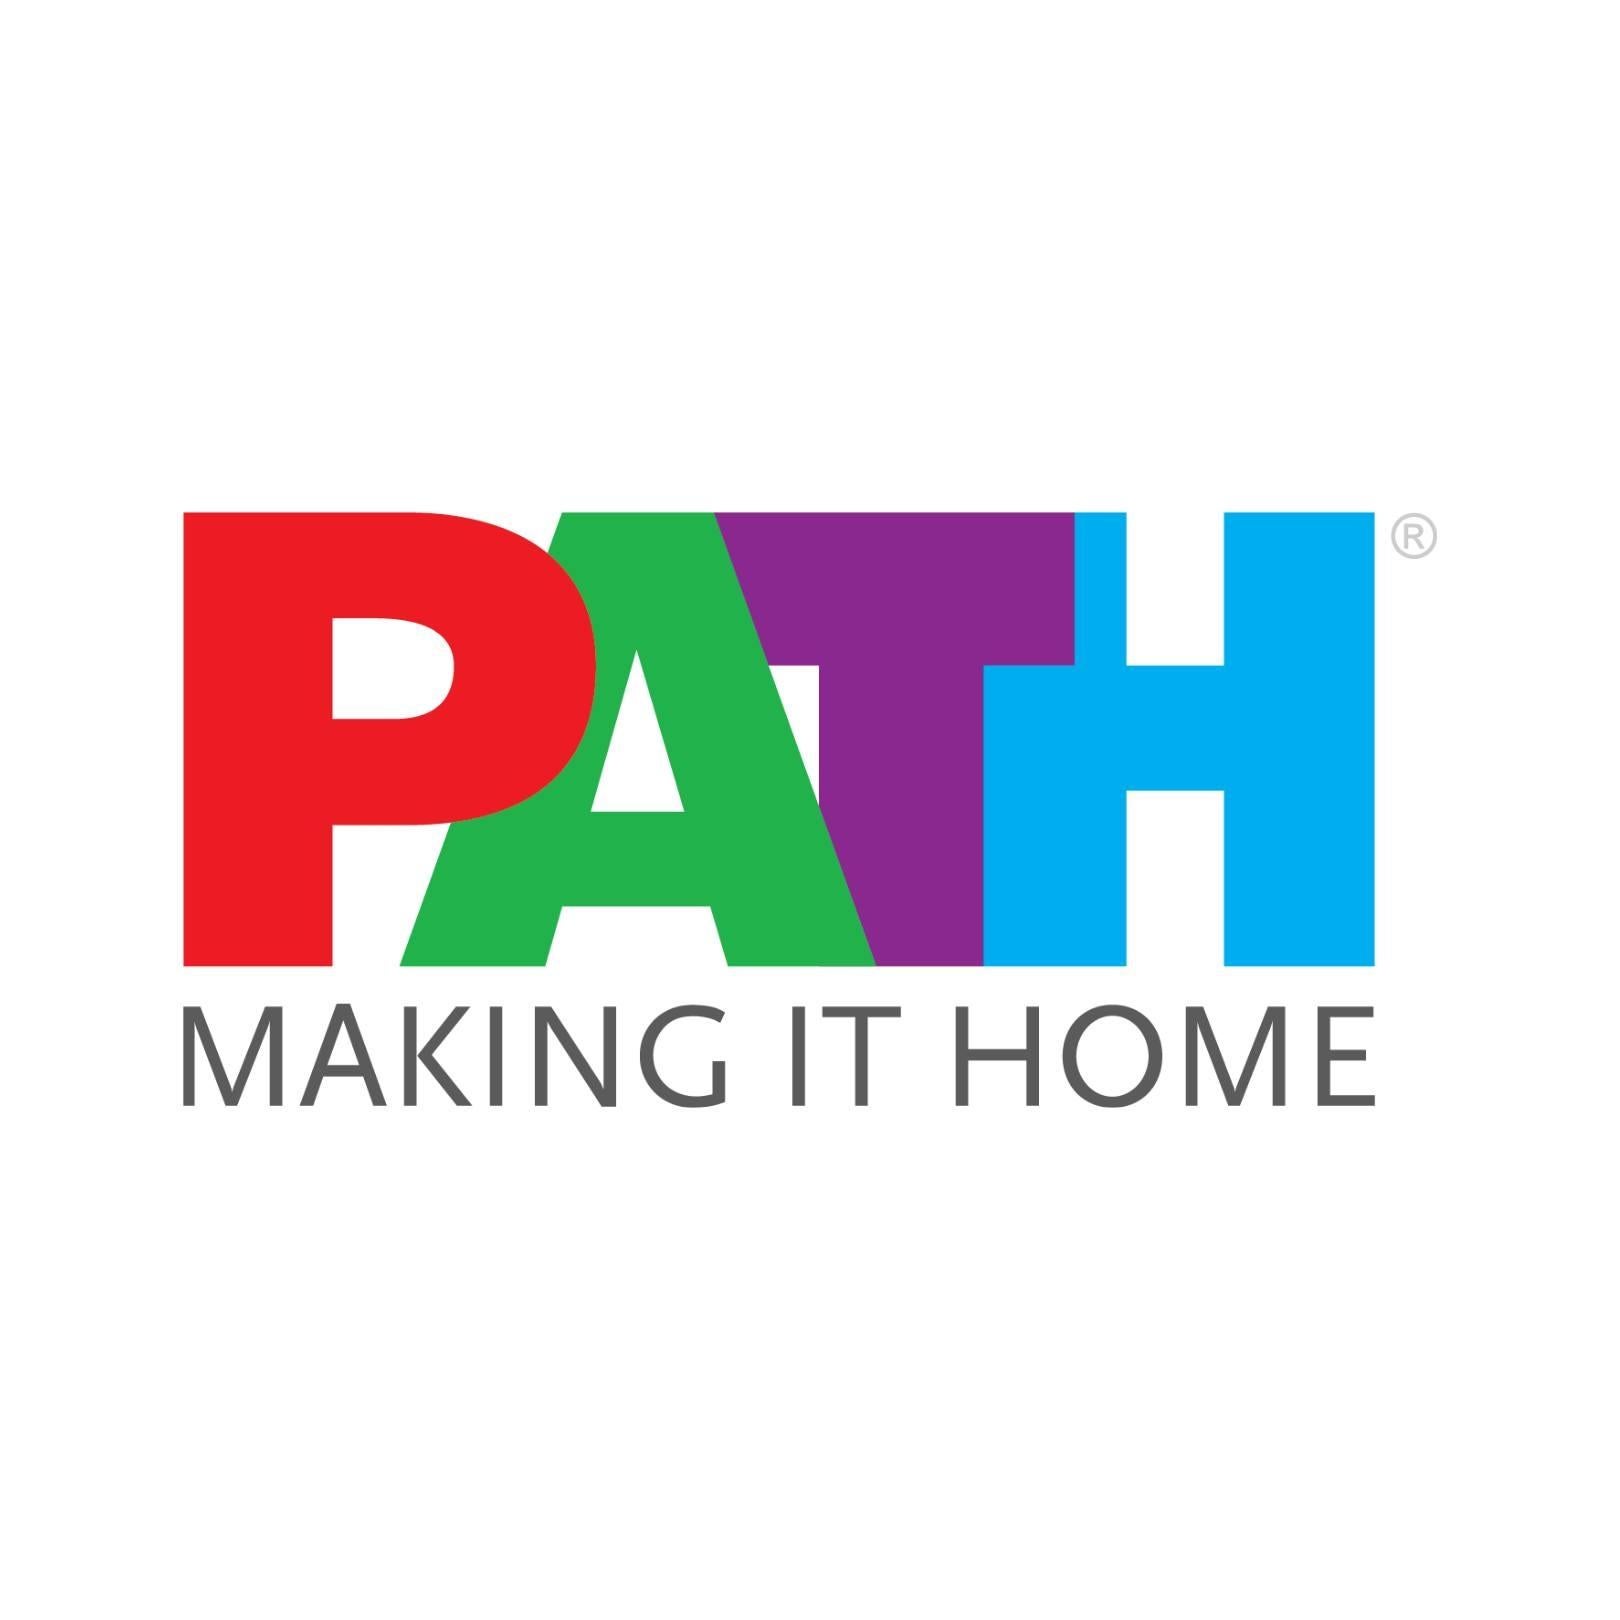 This is a logo for the nonprofit organization, PATH.